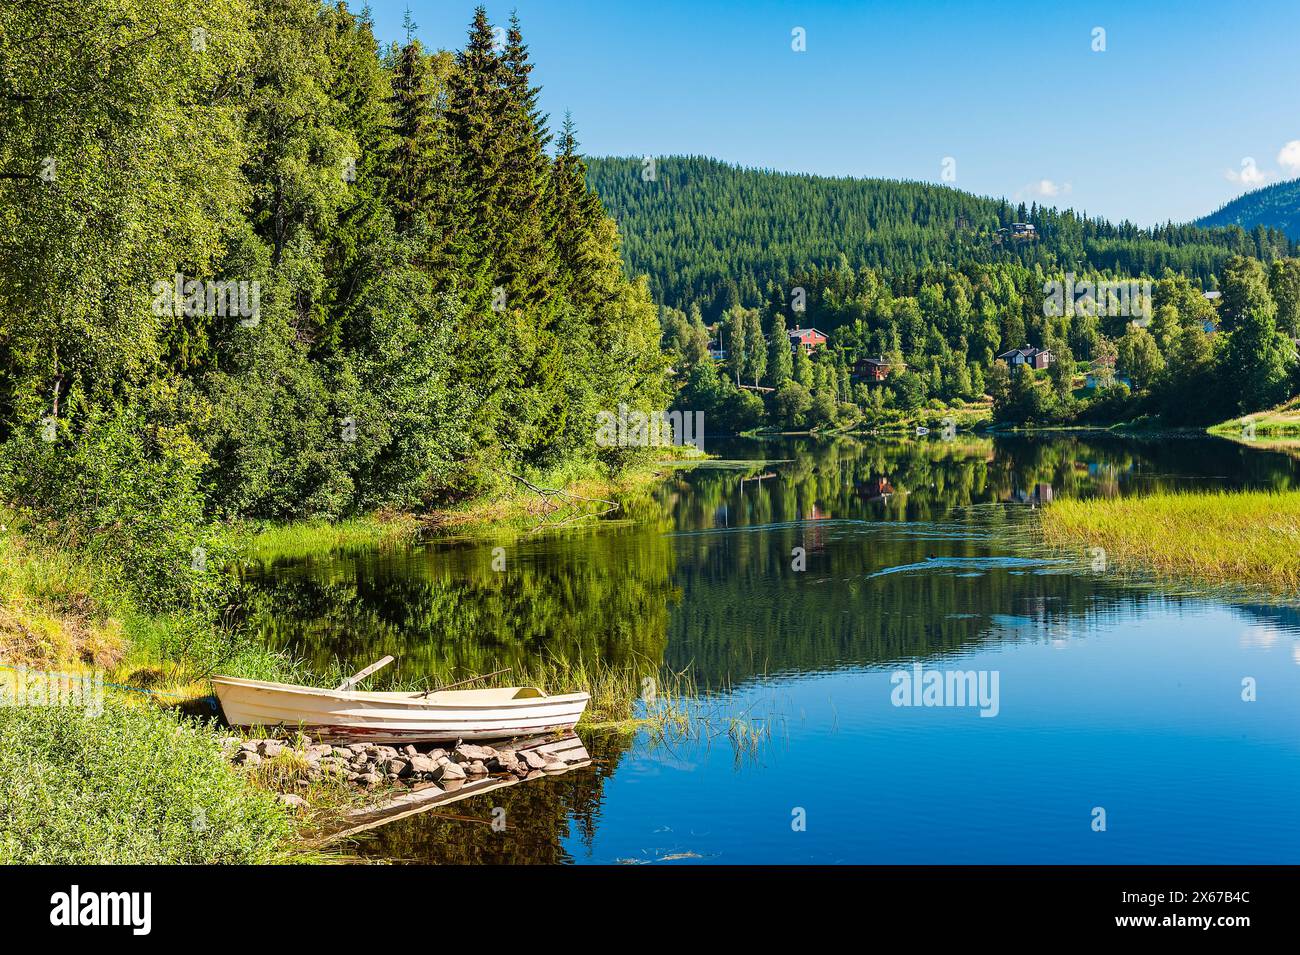 A rowboat is moored to the shore of a river surrounded by lush greenery. The boat appears empty, resting peacefully on the calm water under a clear sk Stock Photo